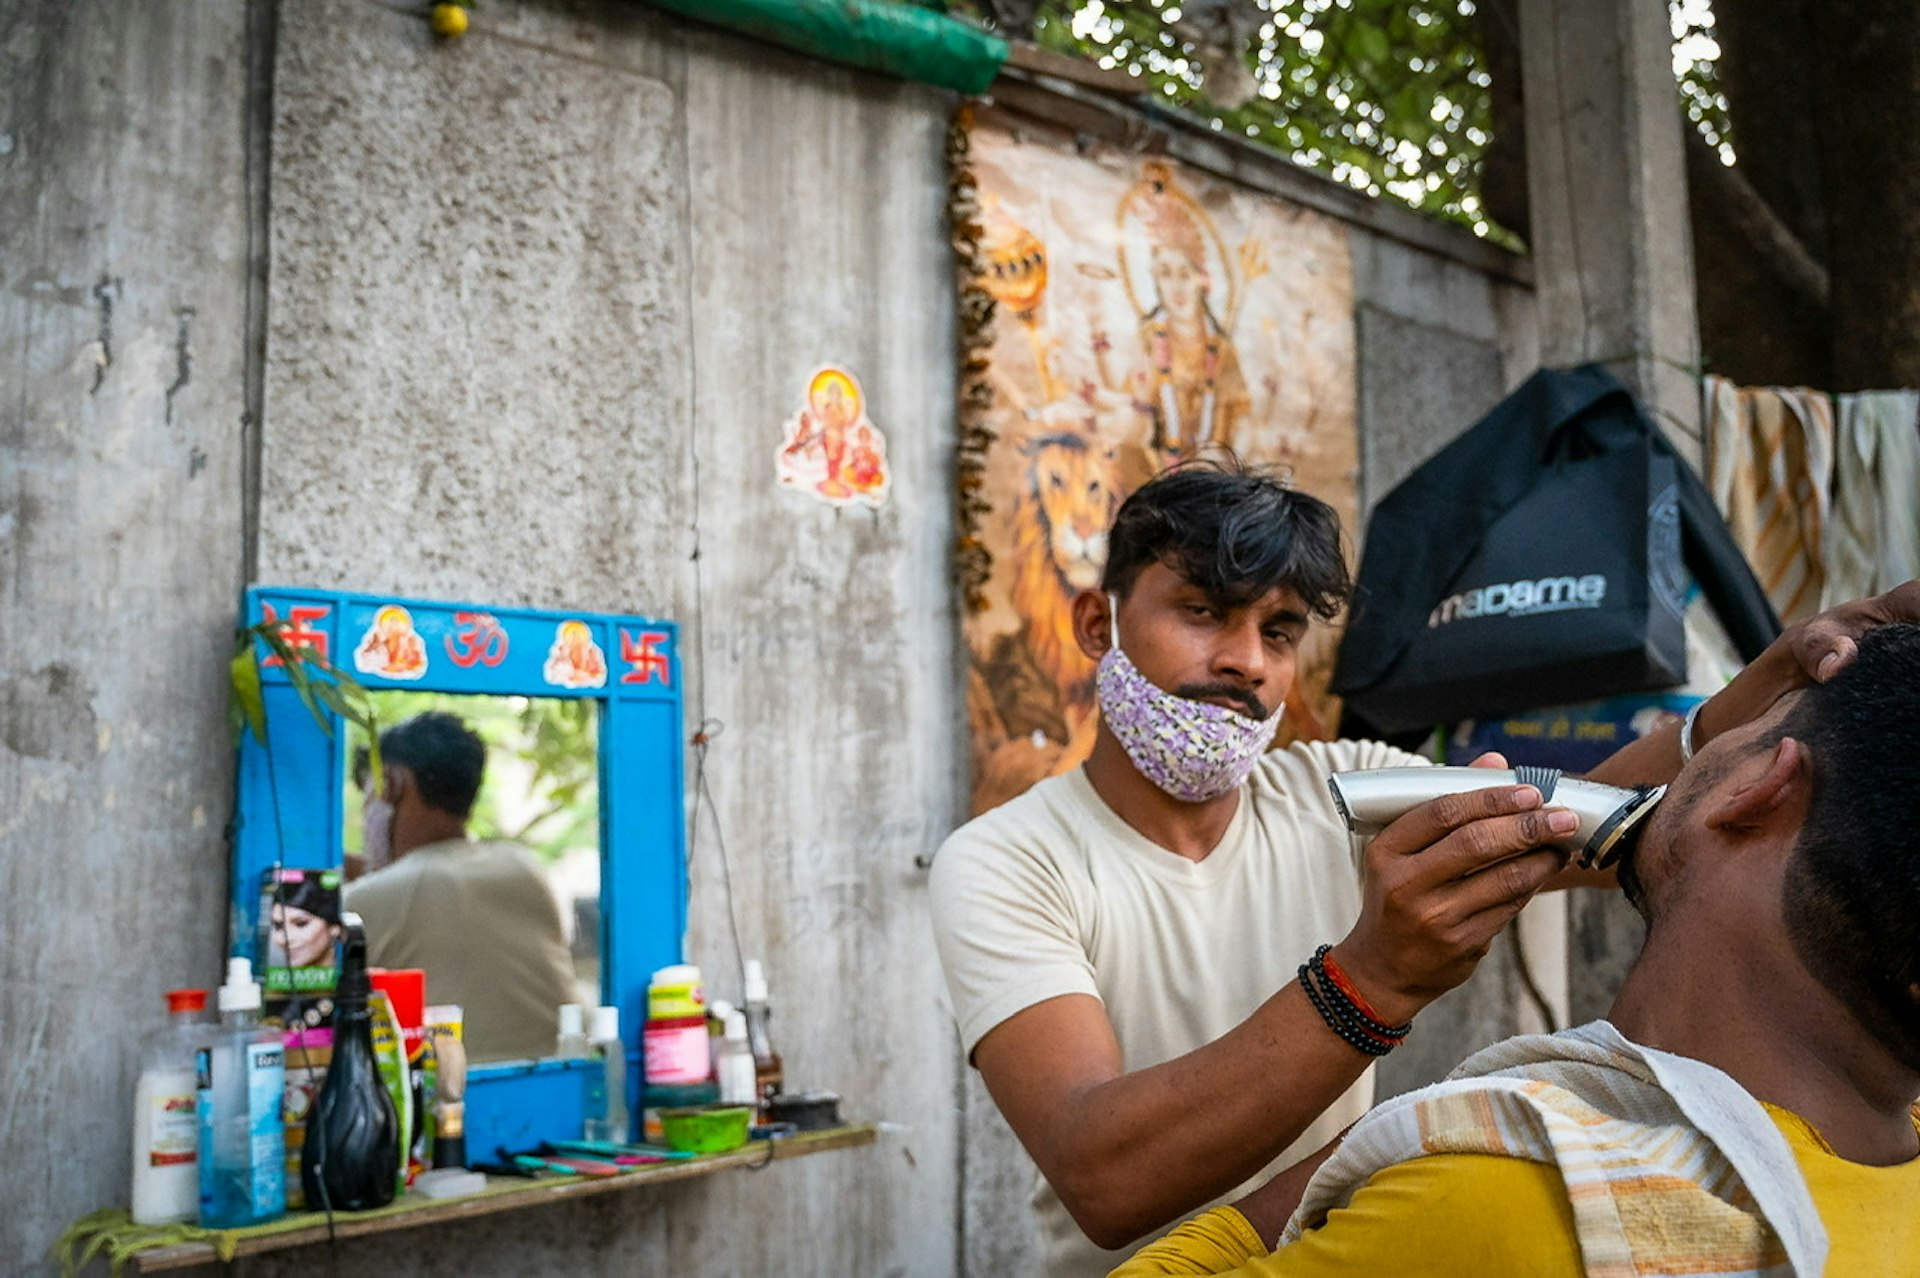 The Indian street barbers persevering amid Covid-19